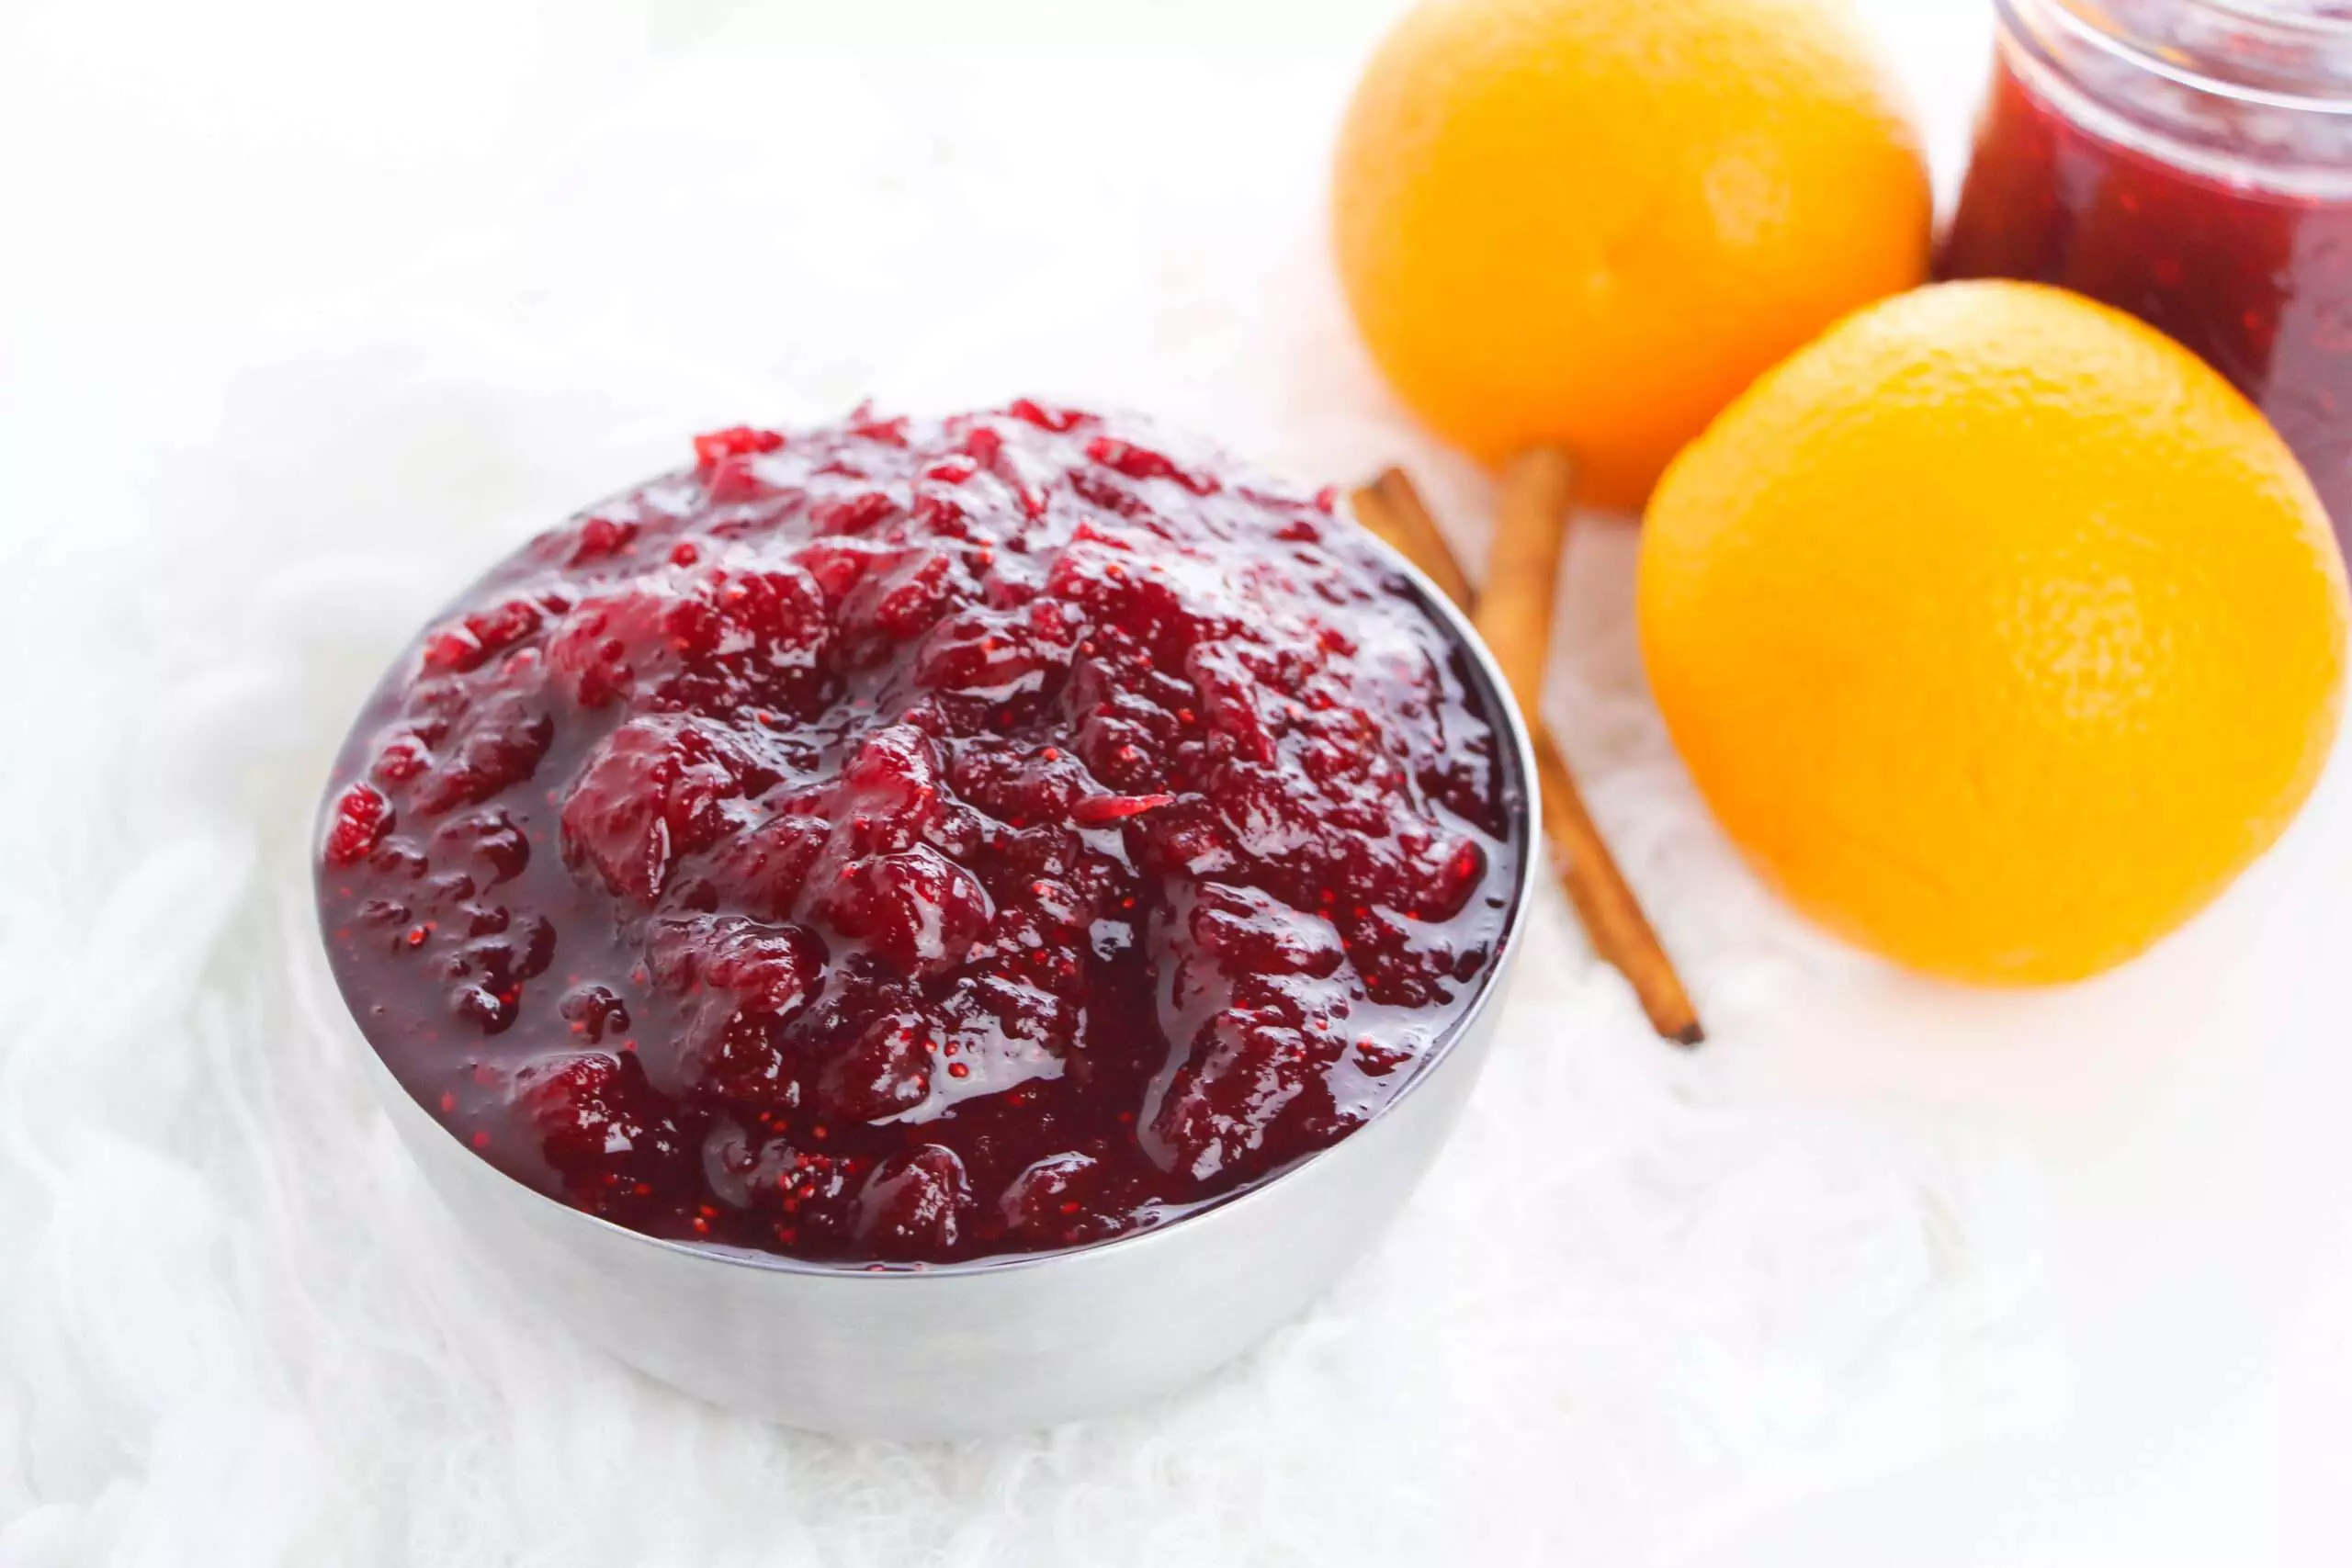 cranberry sauce in a bowl